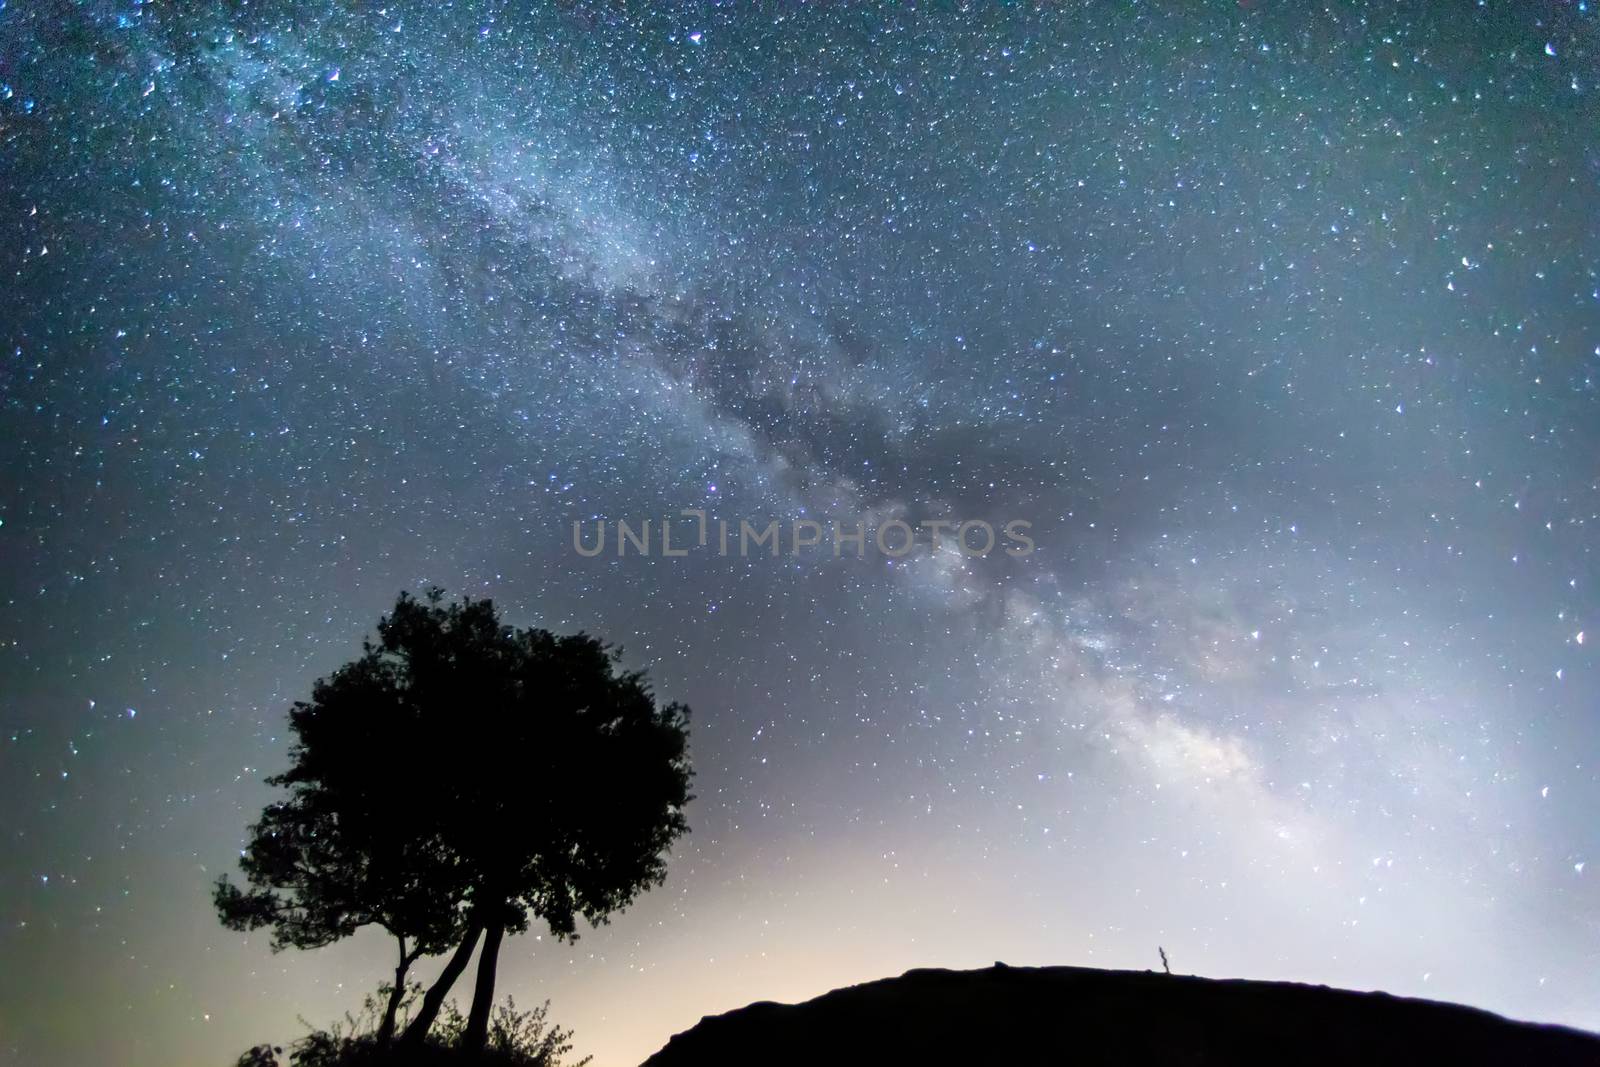 Milky Way over the Meteora, Greece. long exposure; Image contain noise, blur due to slow shutter speed.